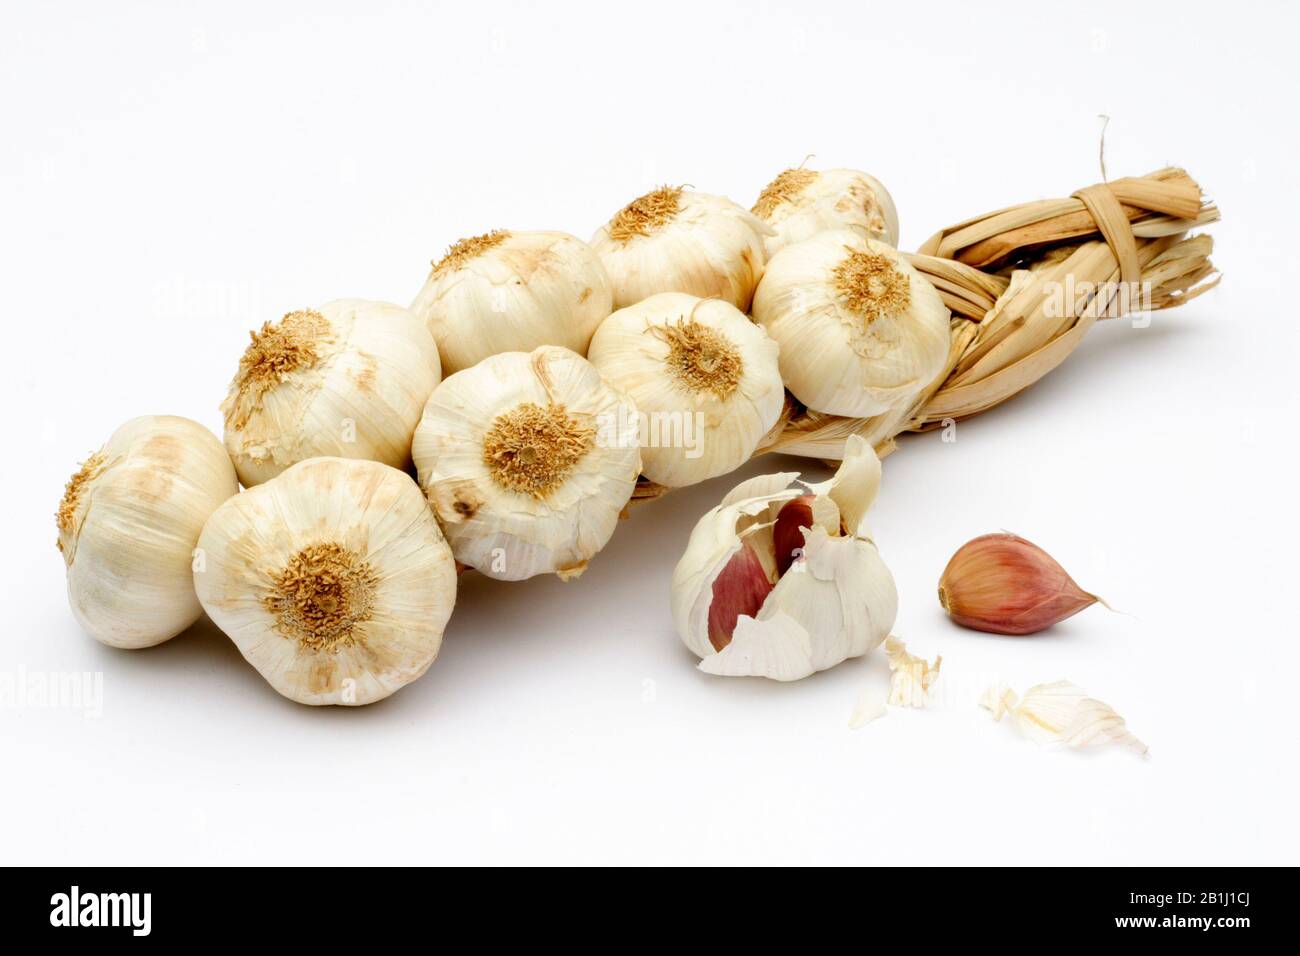 Garlic plait, string of garlic bulbs with pods in the foreground Stock Photo